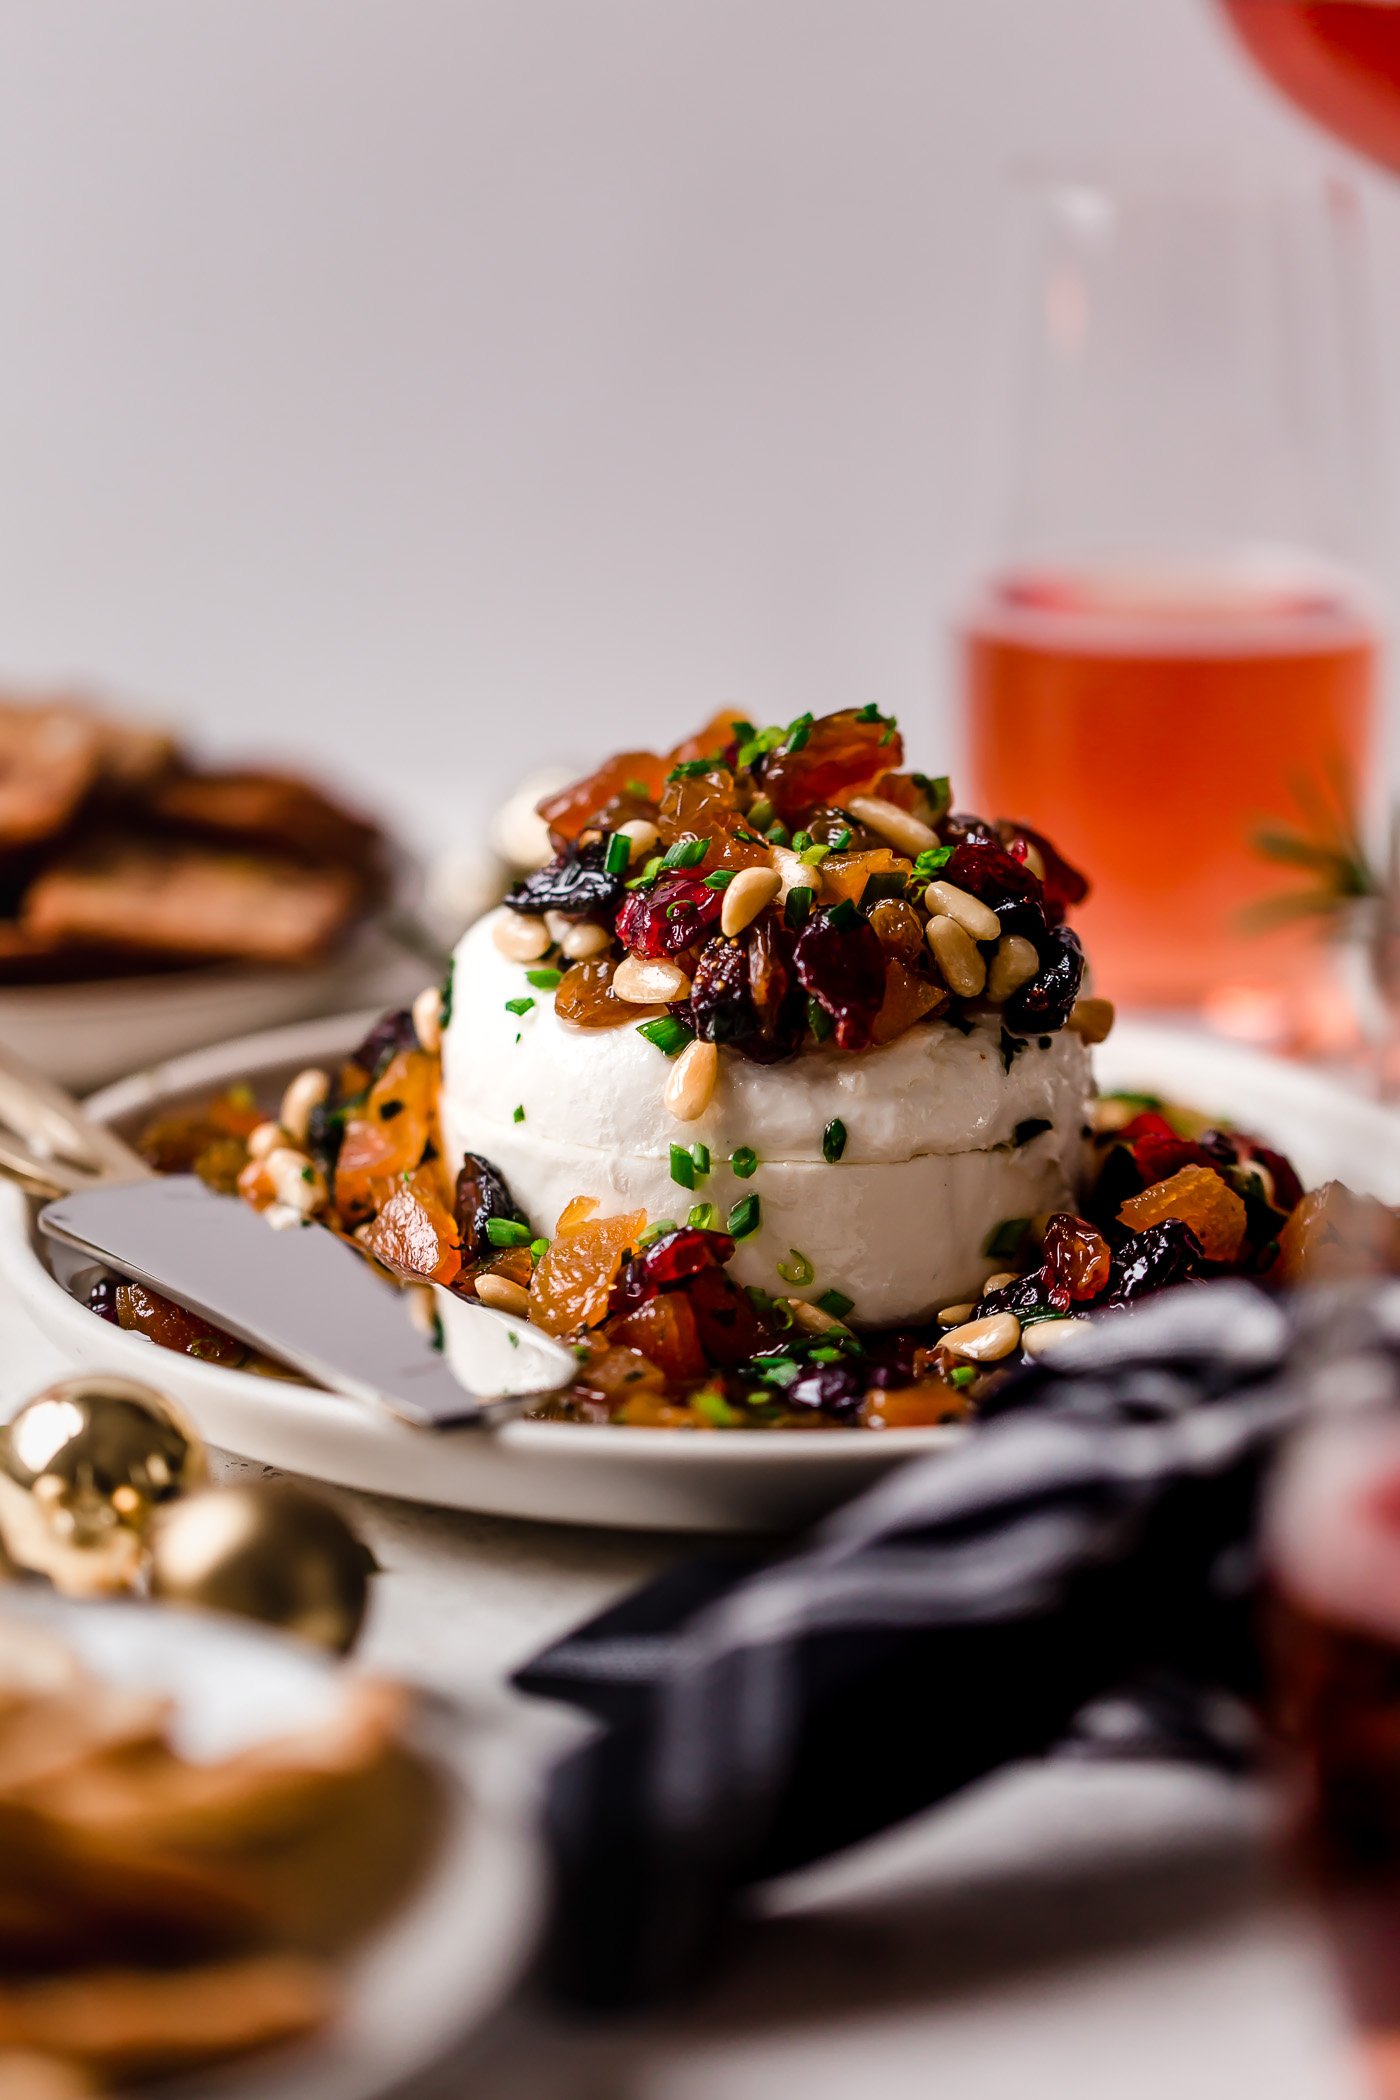 bejeweled holiday marinated goat cheese. easy & beautiful appetizer for any holiday party, this bejeweled holiday marinated goat cheese is always a total show stopper. dried fruits (apricots, golden raisins, figs, cranberries) marinated with fresh herbs & pine nuts, then served over a generous portion of goat cheese. this marinated goat cheese recipe only takes 10 minutes to prep & is always a hit! #playswellwithbutter #marinatedgoatcheese #cheeseball #holidayappetizers #crowdpleaserappetizer